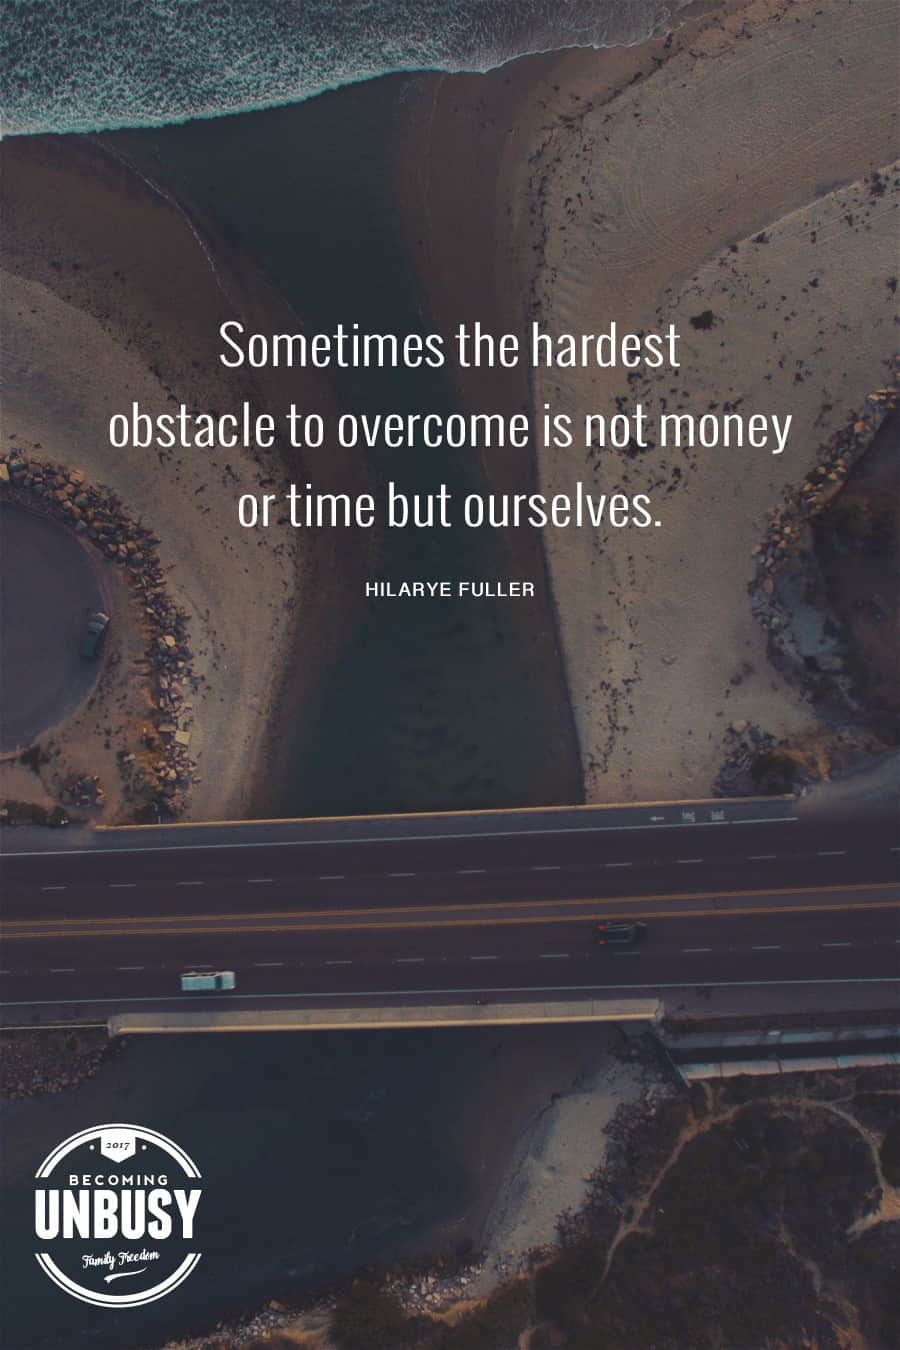 Sometimes the hardest obstacle to overcome is not money or time but ourselves. #travelmore #travel #familytravel #quote #travelquote *Love this quote and this post about The Art of Non-Conformity 